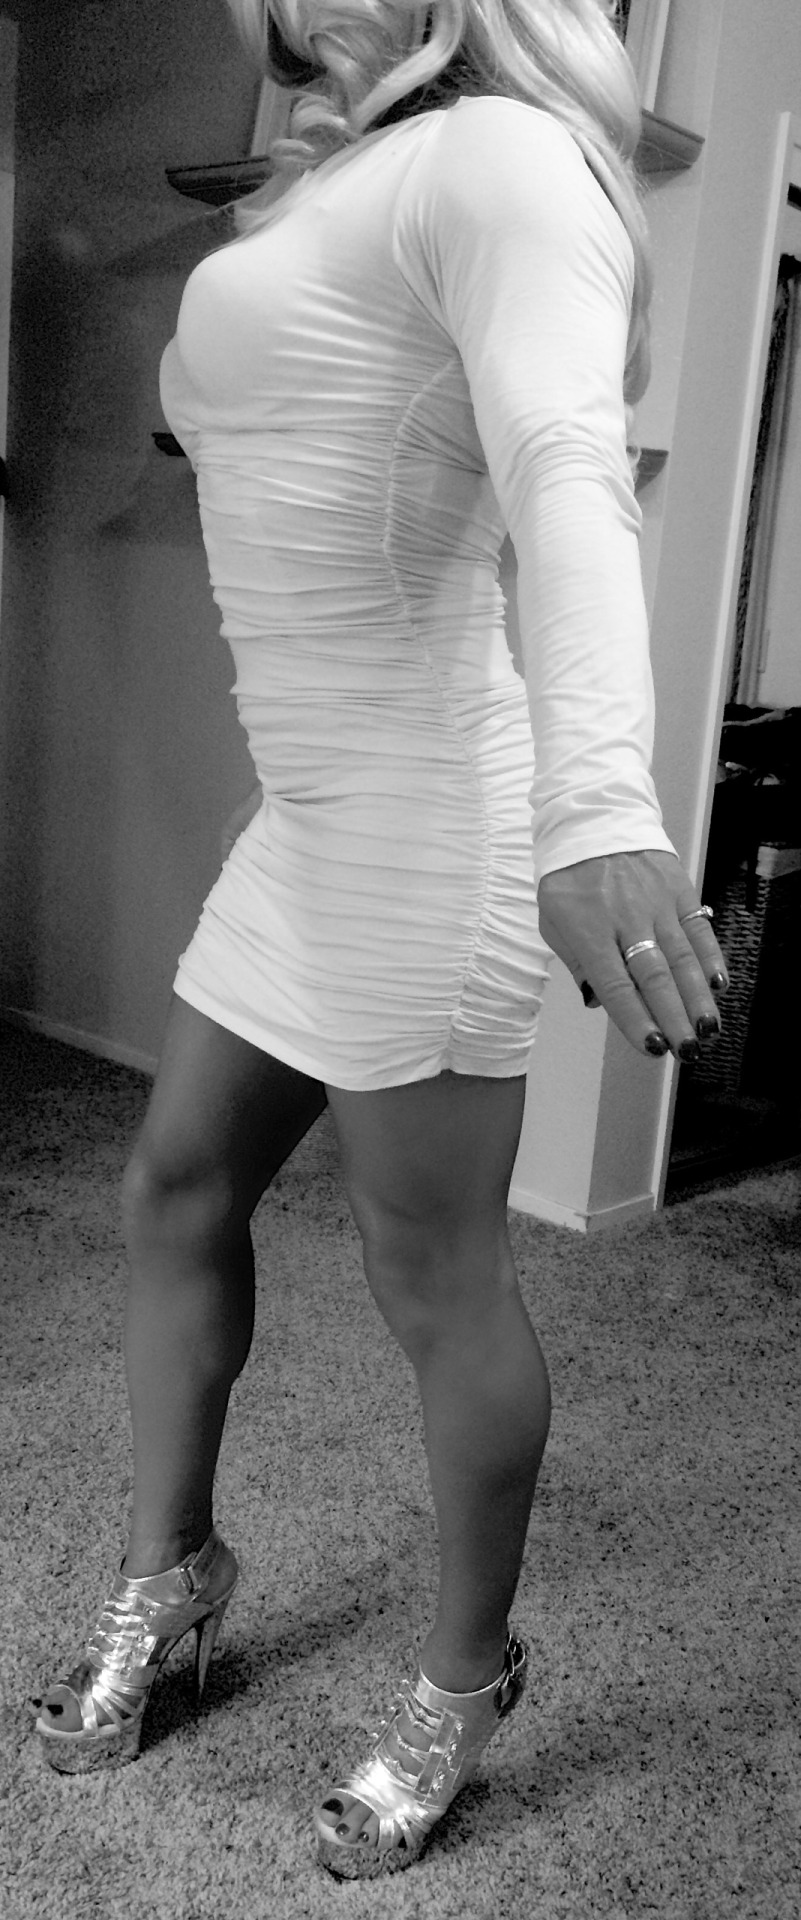 trans-amee:  A few more pictures of my new whore dress I’m black and white.   what